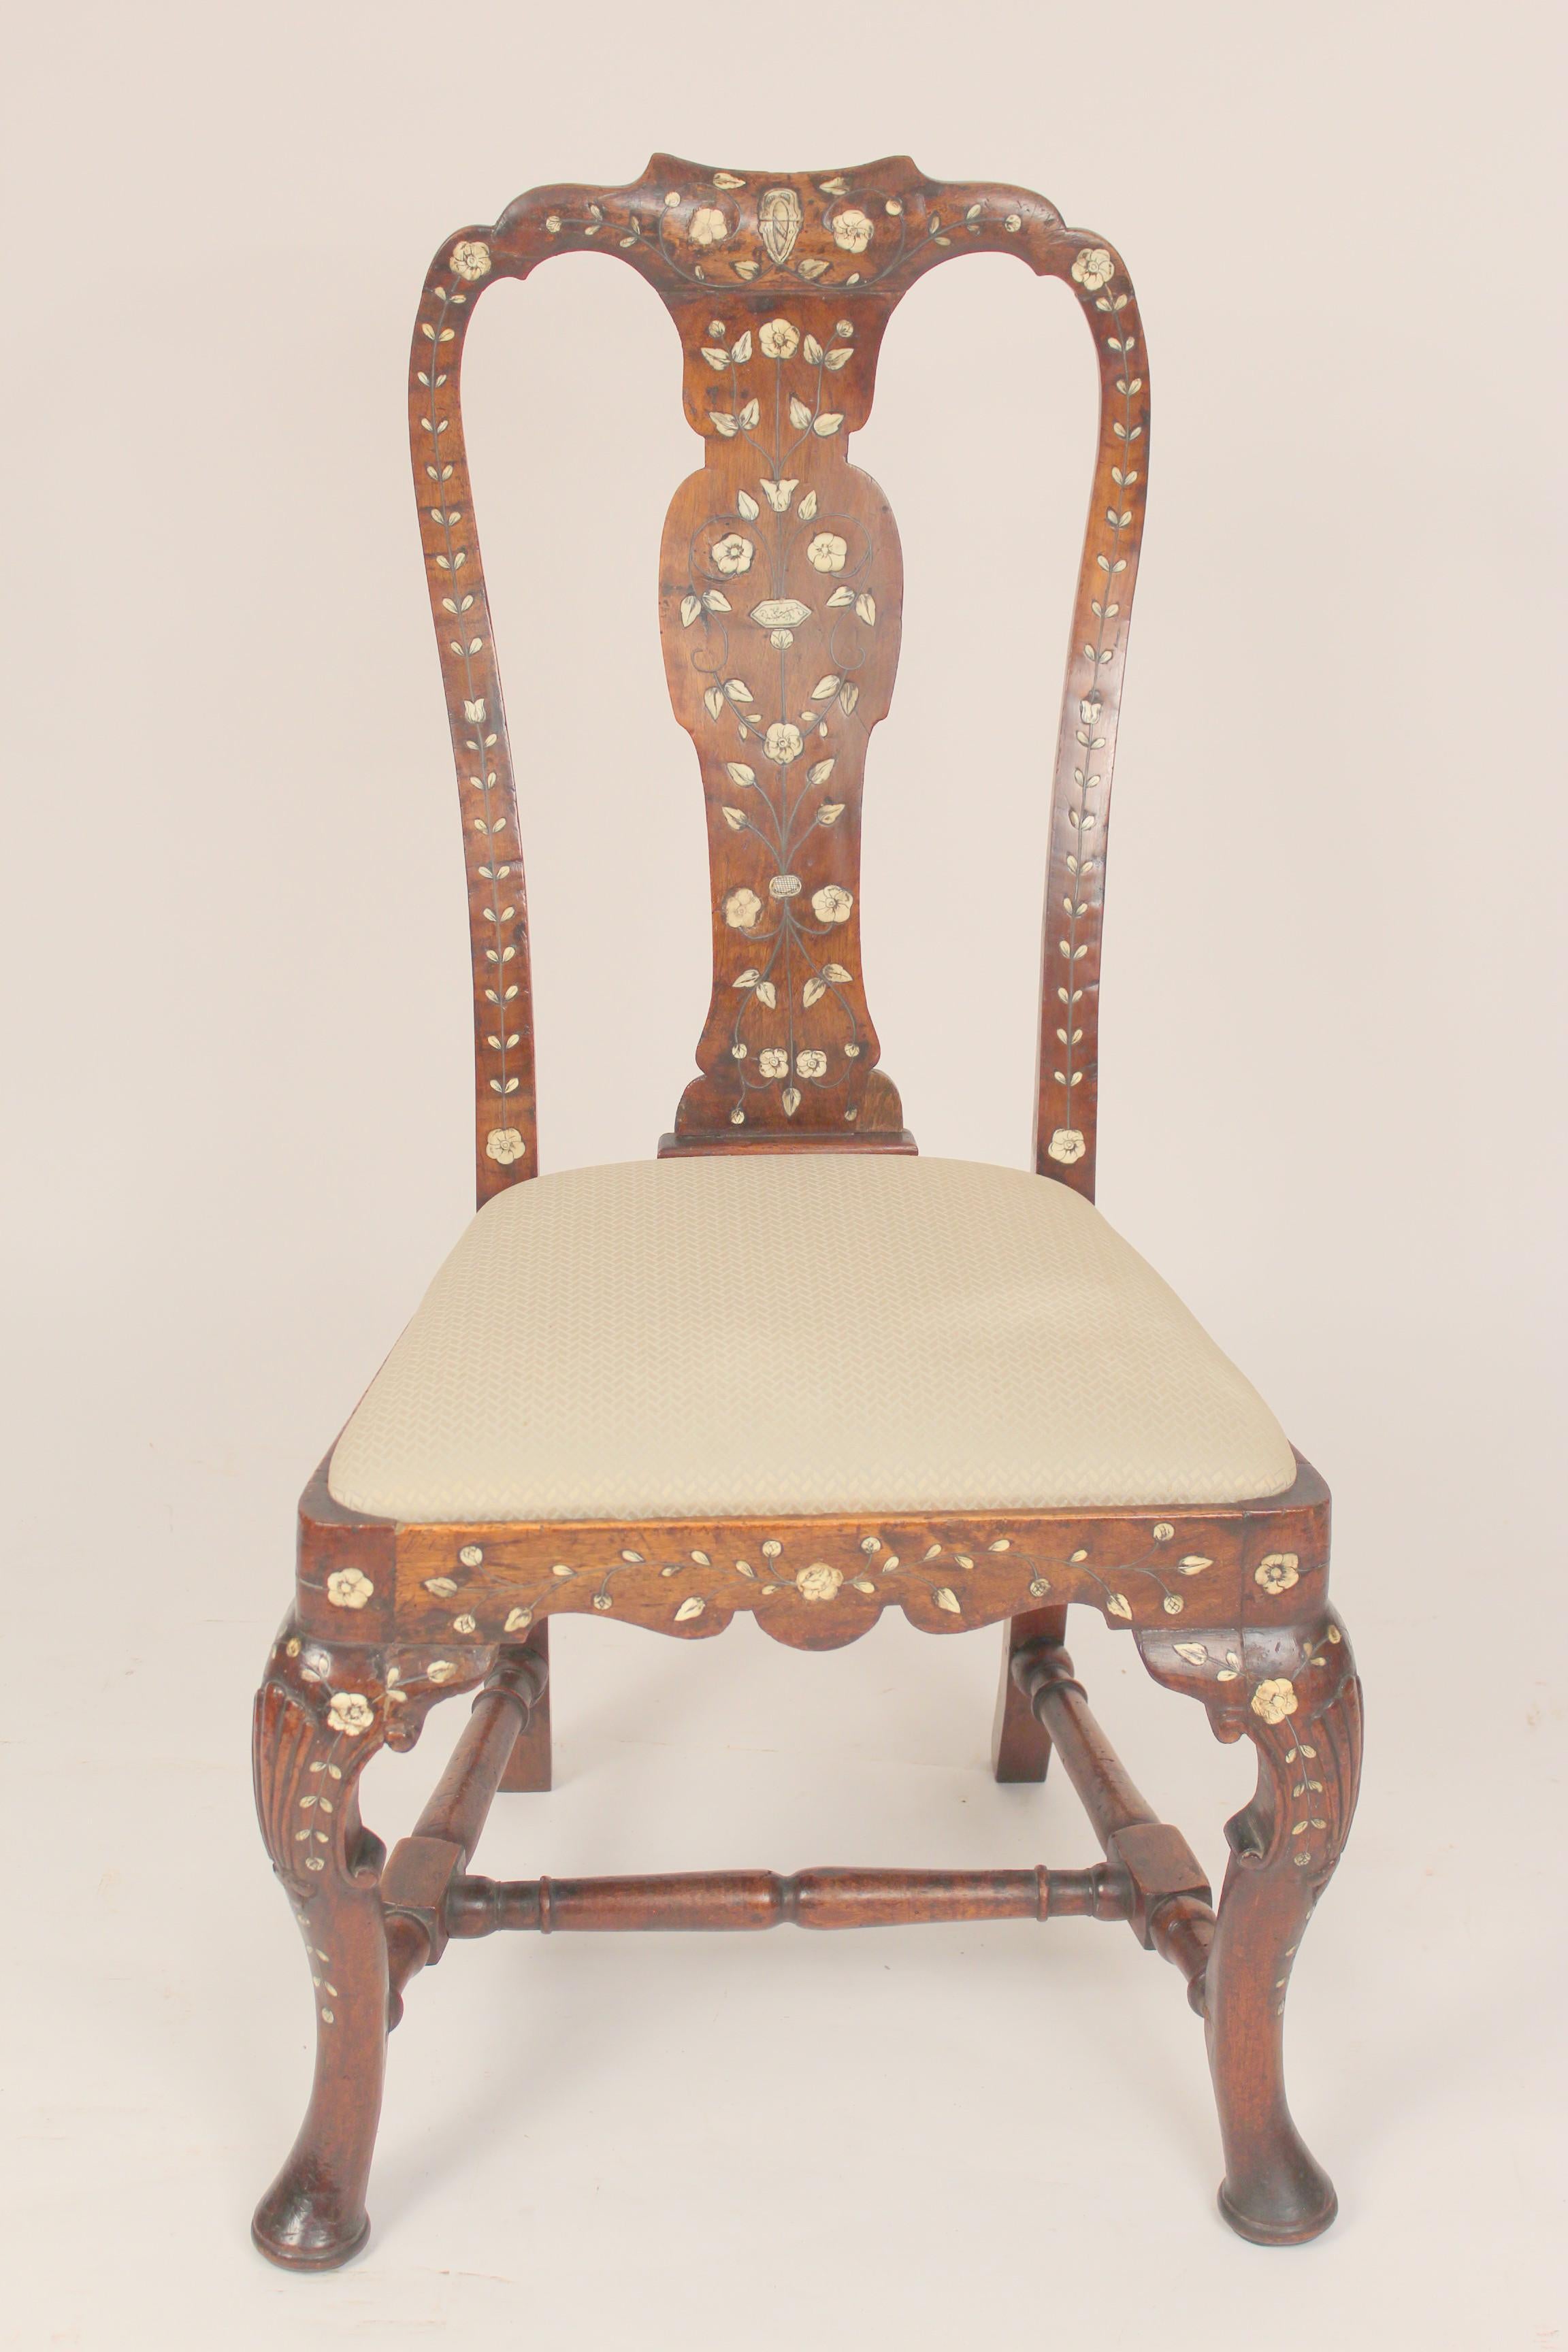 Antique Indian export bone inlaid Queen Anne style side chair, 19th century. Seat dimensions, depth 15.5